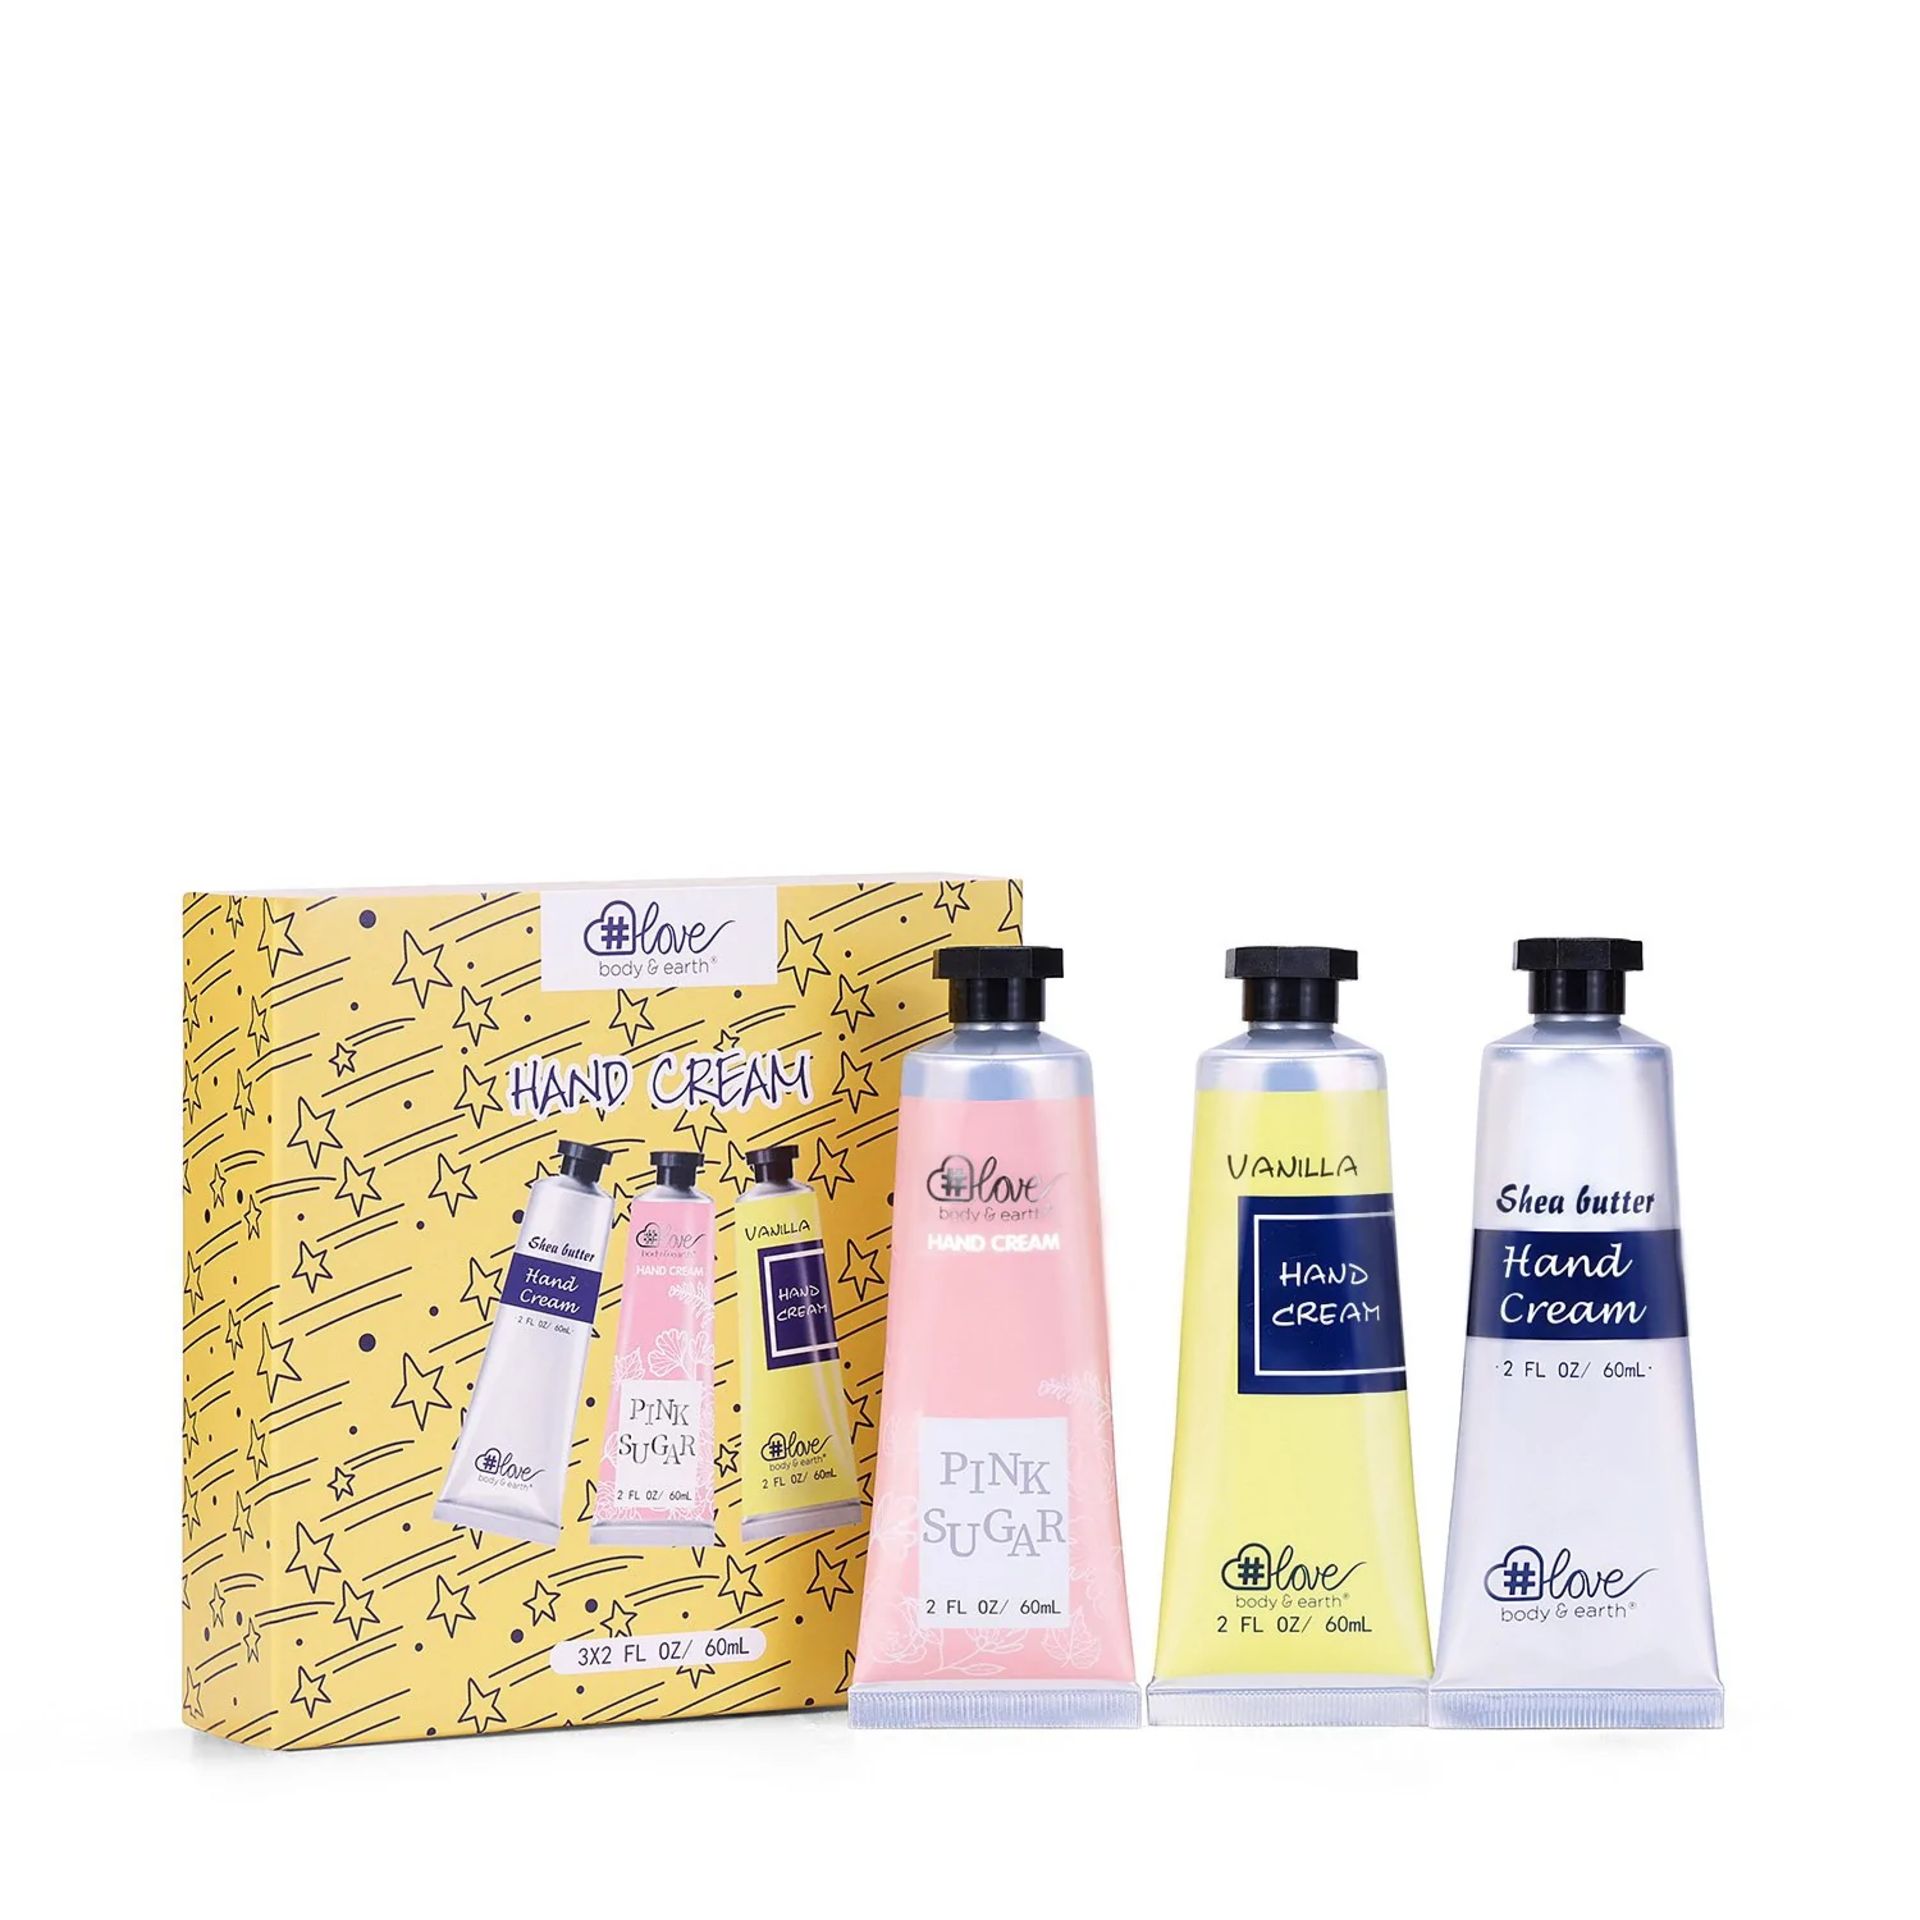 Hand Cream Gift Set - Hand Lotion for Women, Shea Butter Hand Cream for Dry Working Hands - Image 3 of 3